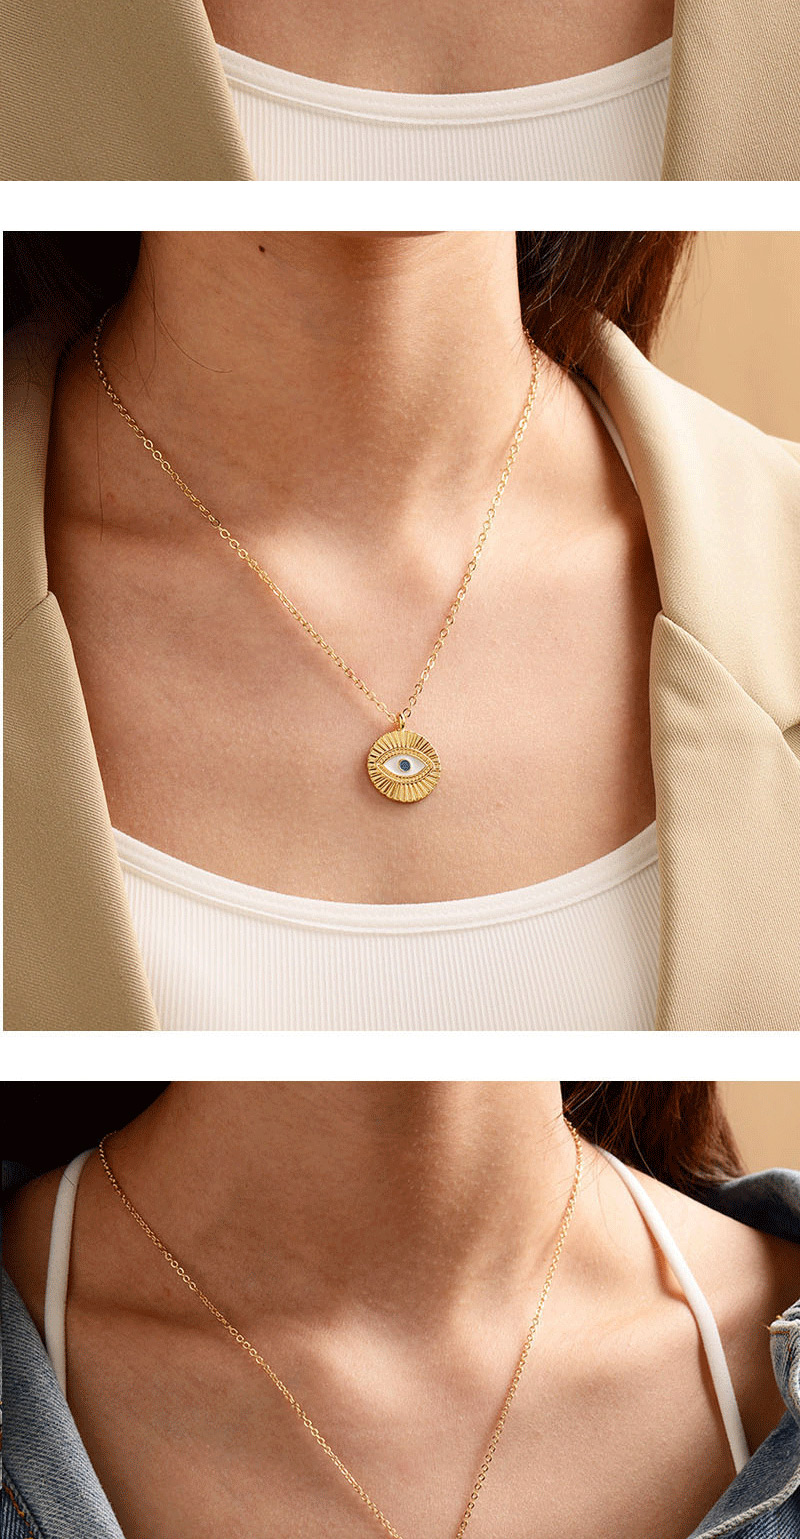 Fashion Royal Blue Eyes Gold-plated Oil Drop Eyes And Diamond Hollow Bead Necklace,Pendants